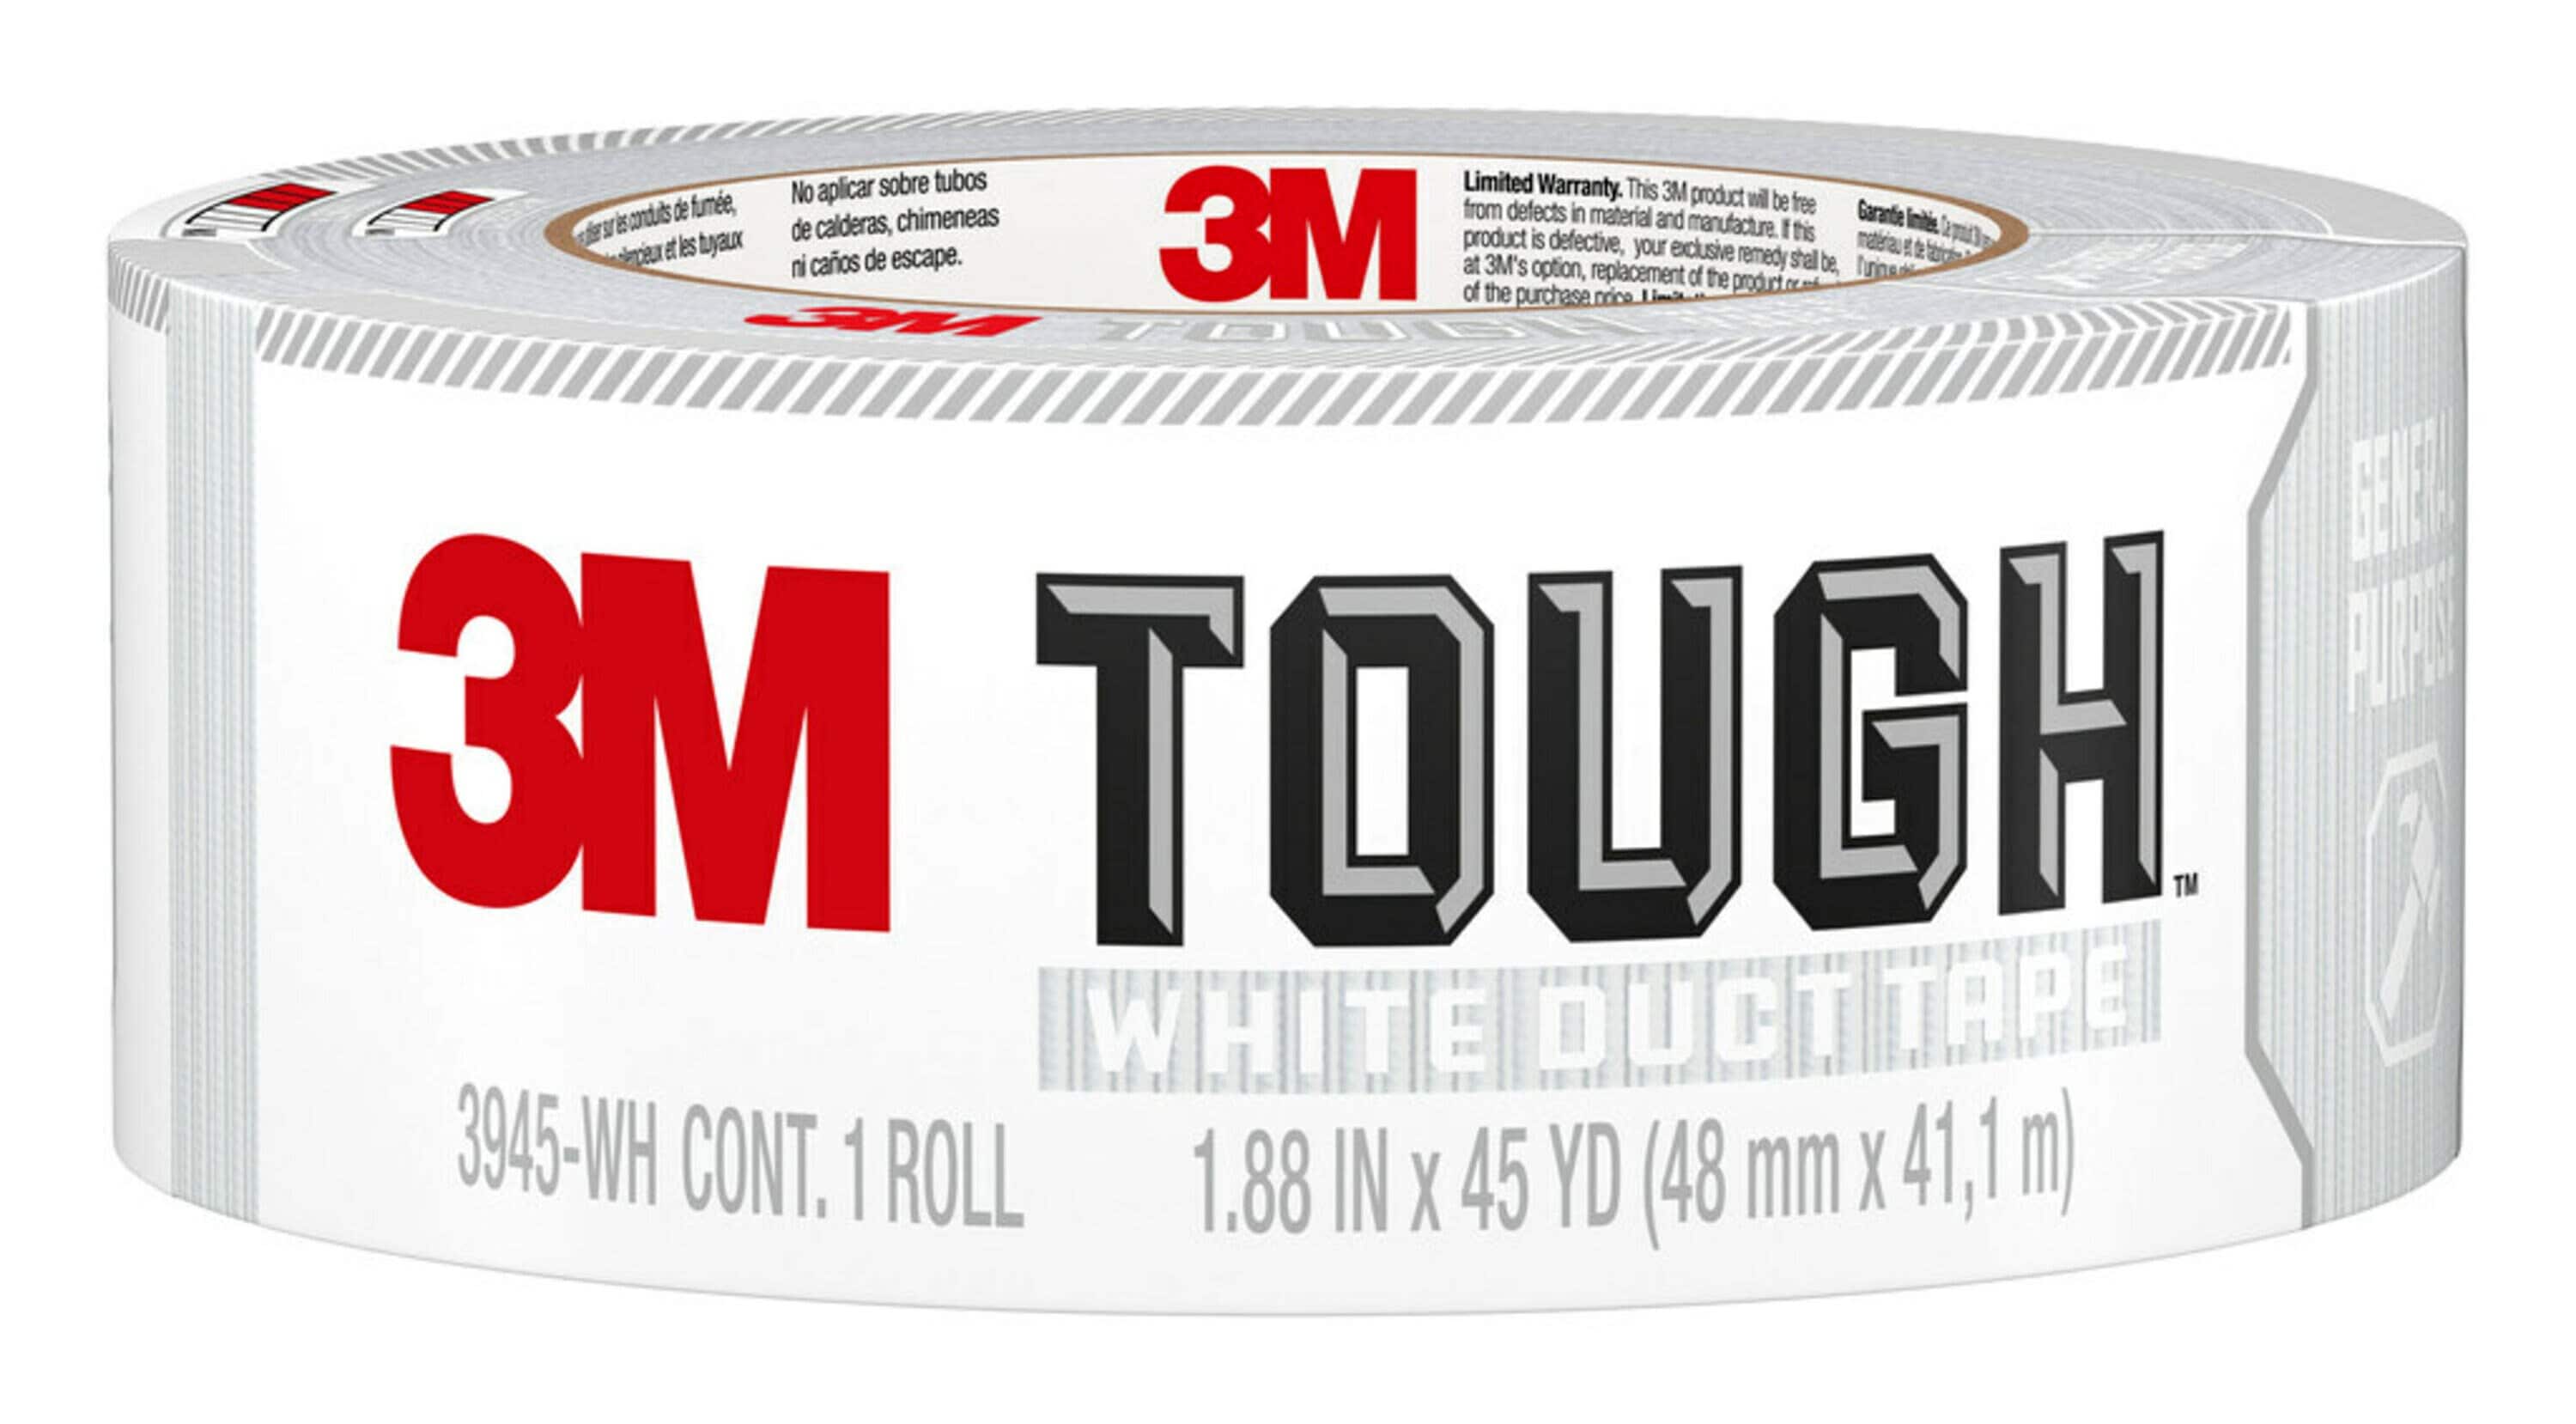 3M Automotive Attachment Tape, Gray, 1/4 in x 20 yd, 30 Mil